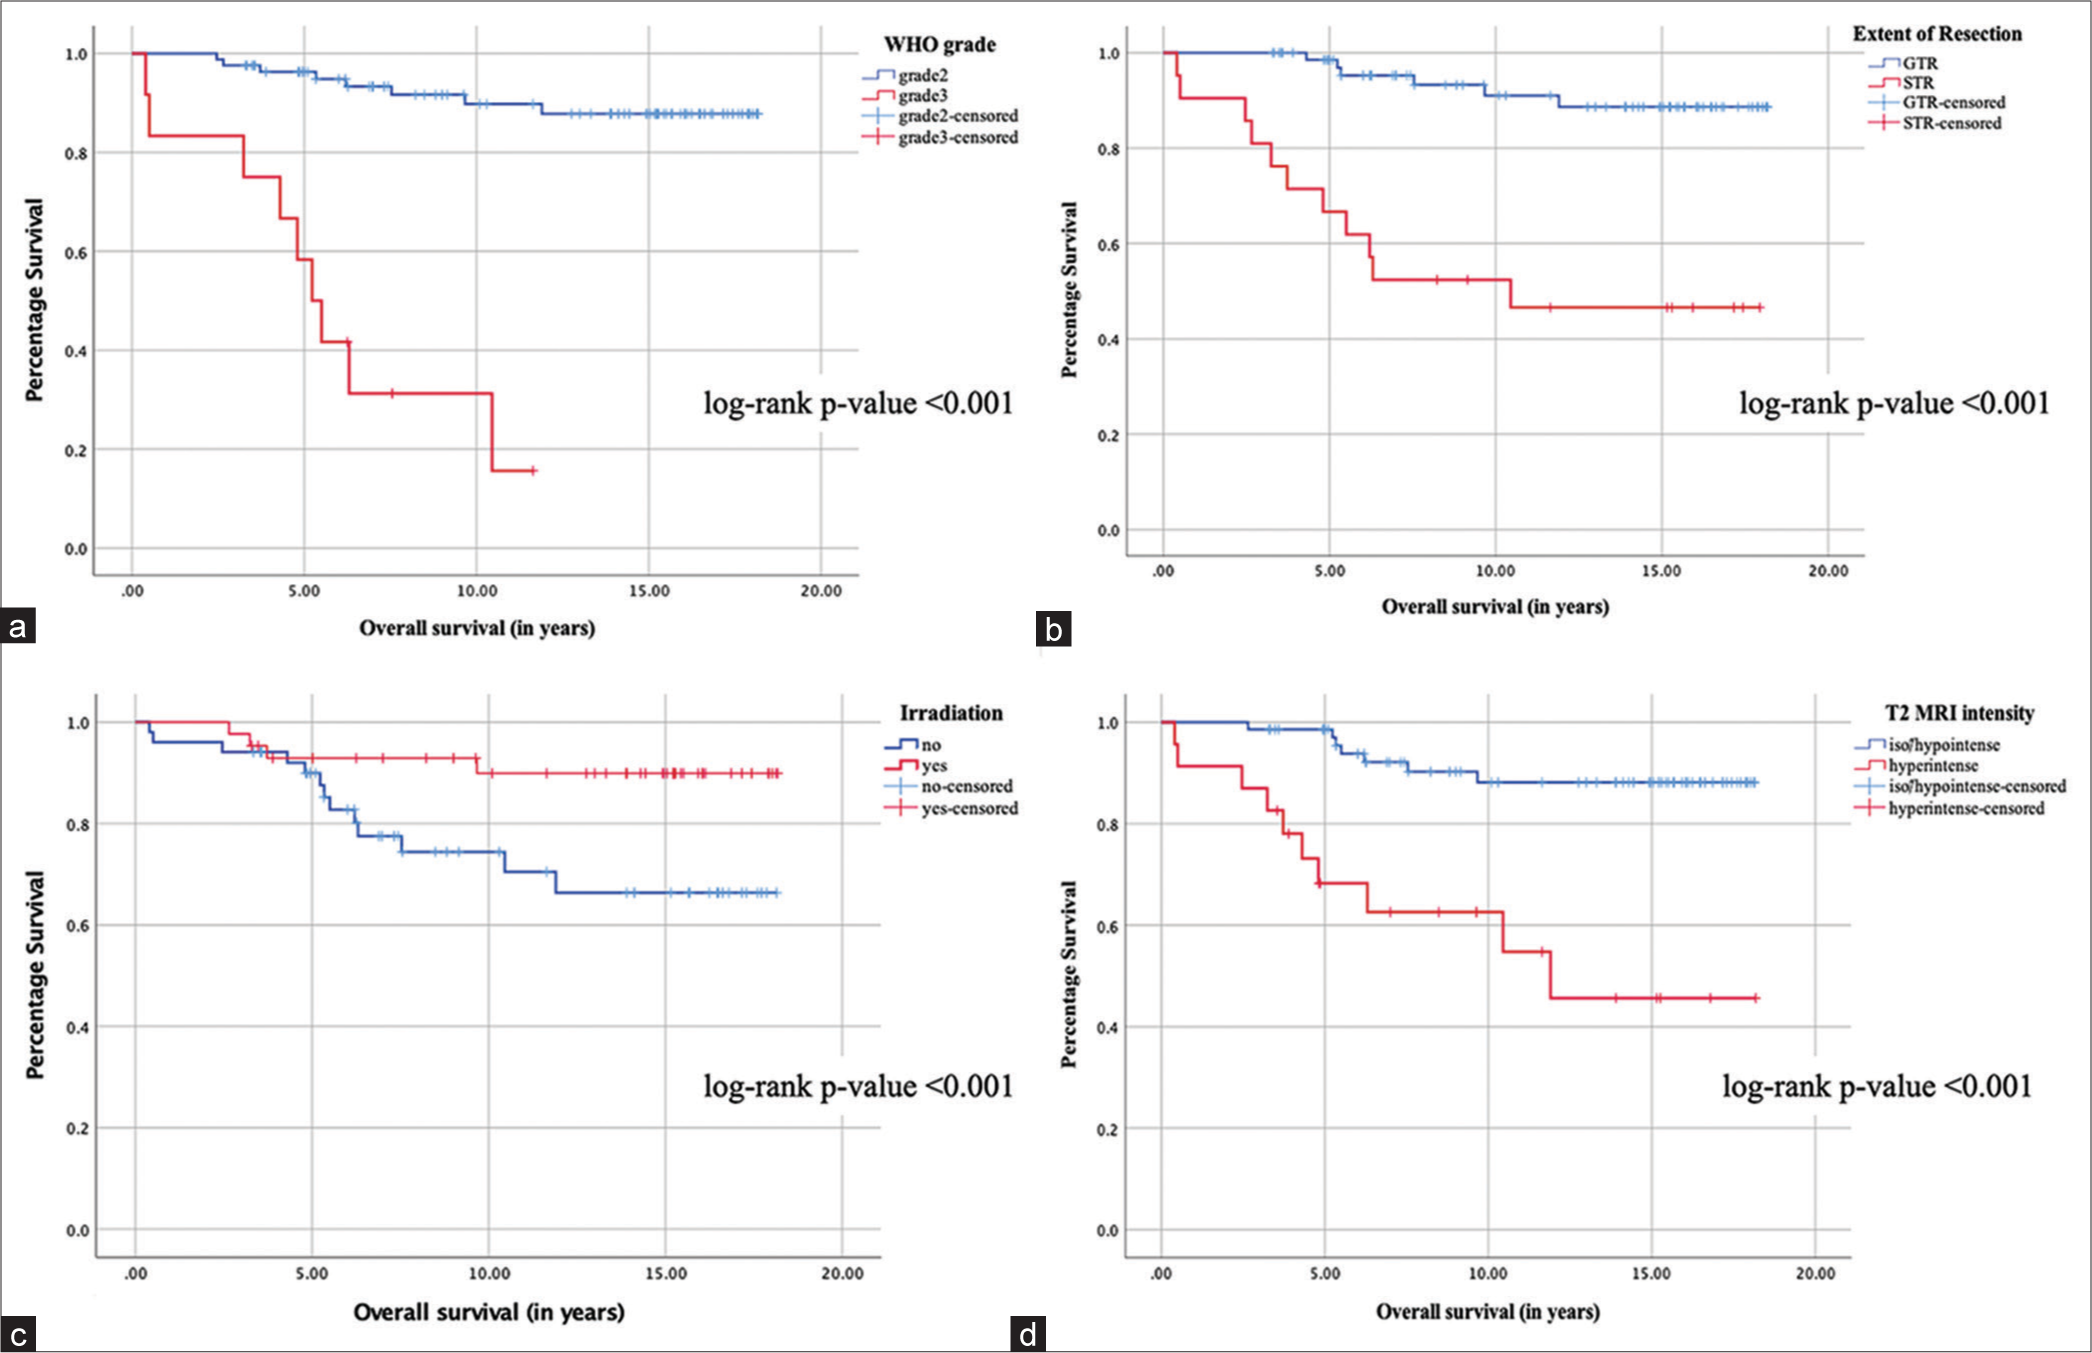 Selected Kaplan–Meier plots of progression-free survival for high-grade meningiomas. In cumulative analyses, (a) median survival was 16.7 years (95% confidence interval [CI] = 15.85–17.69 years) with grade 2 meningiomas while only 5.22 years (95% CI = 4.04–6.41 years) with grade 3 meningiomas, (b) the median survival was 16.99 years (95% CI = 16.09–17.89 years) after gross total resection and 10.66 years (95% CI = 7.6–13.72 years) after subtotal resection’, (c) the median survival after surgery and adjuvant irradiation was longer, 16.85 years (95% CI = 15.61–18.09 years) than after surgery alone 14.14 years (95% CI = 12.3–15.98 years), and (d) the median survival for iso/hypointense lesion was 16.73 years (95% CI = 15.75–17.72 years) while that of hyperintense lesion was 11.45 years (95% CI = 8.41–14.49 years). WHO: World Health Organization, GTR: Gross total resection, STR: Subtotal resection